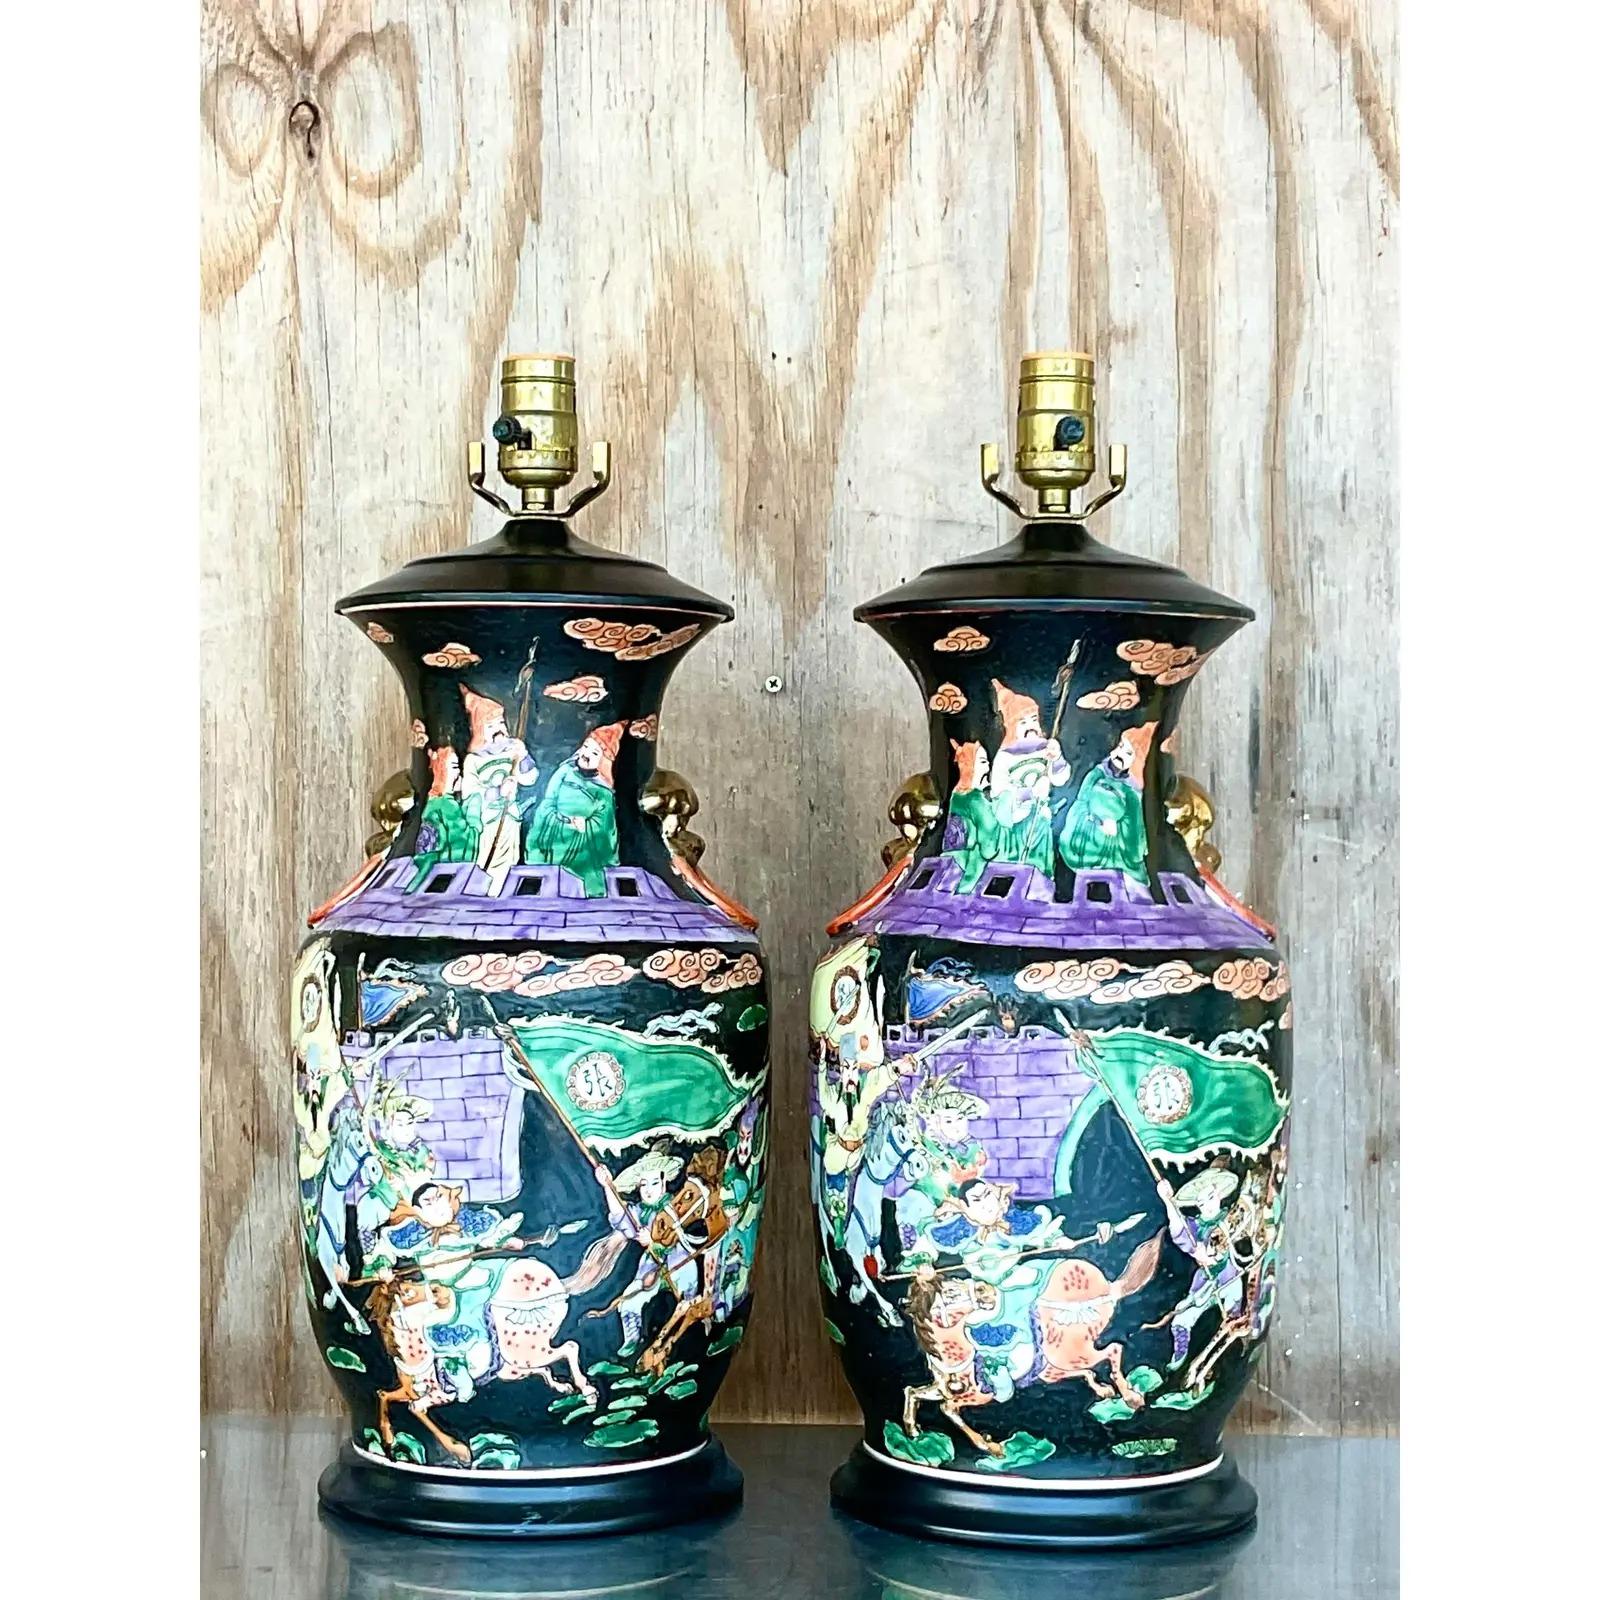 20th Century Vintage Asian Jewel Tone Chinoiserie Ceramic Lamps - a Pair For Sale